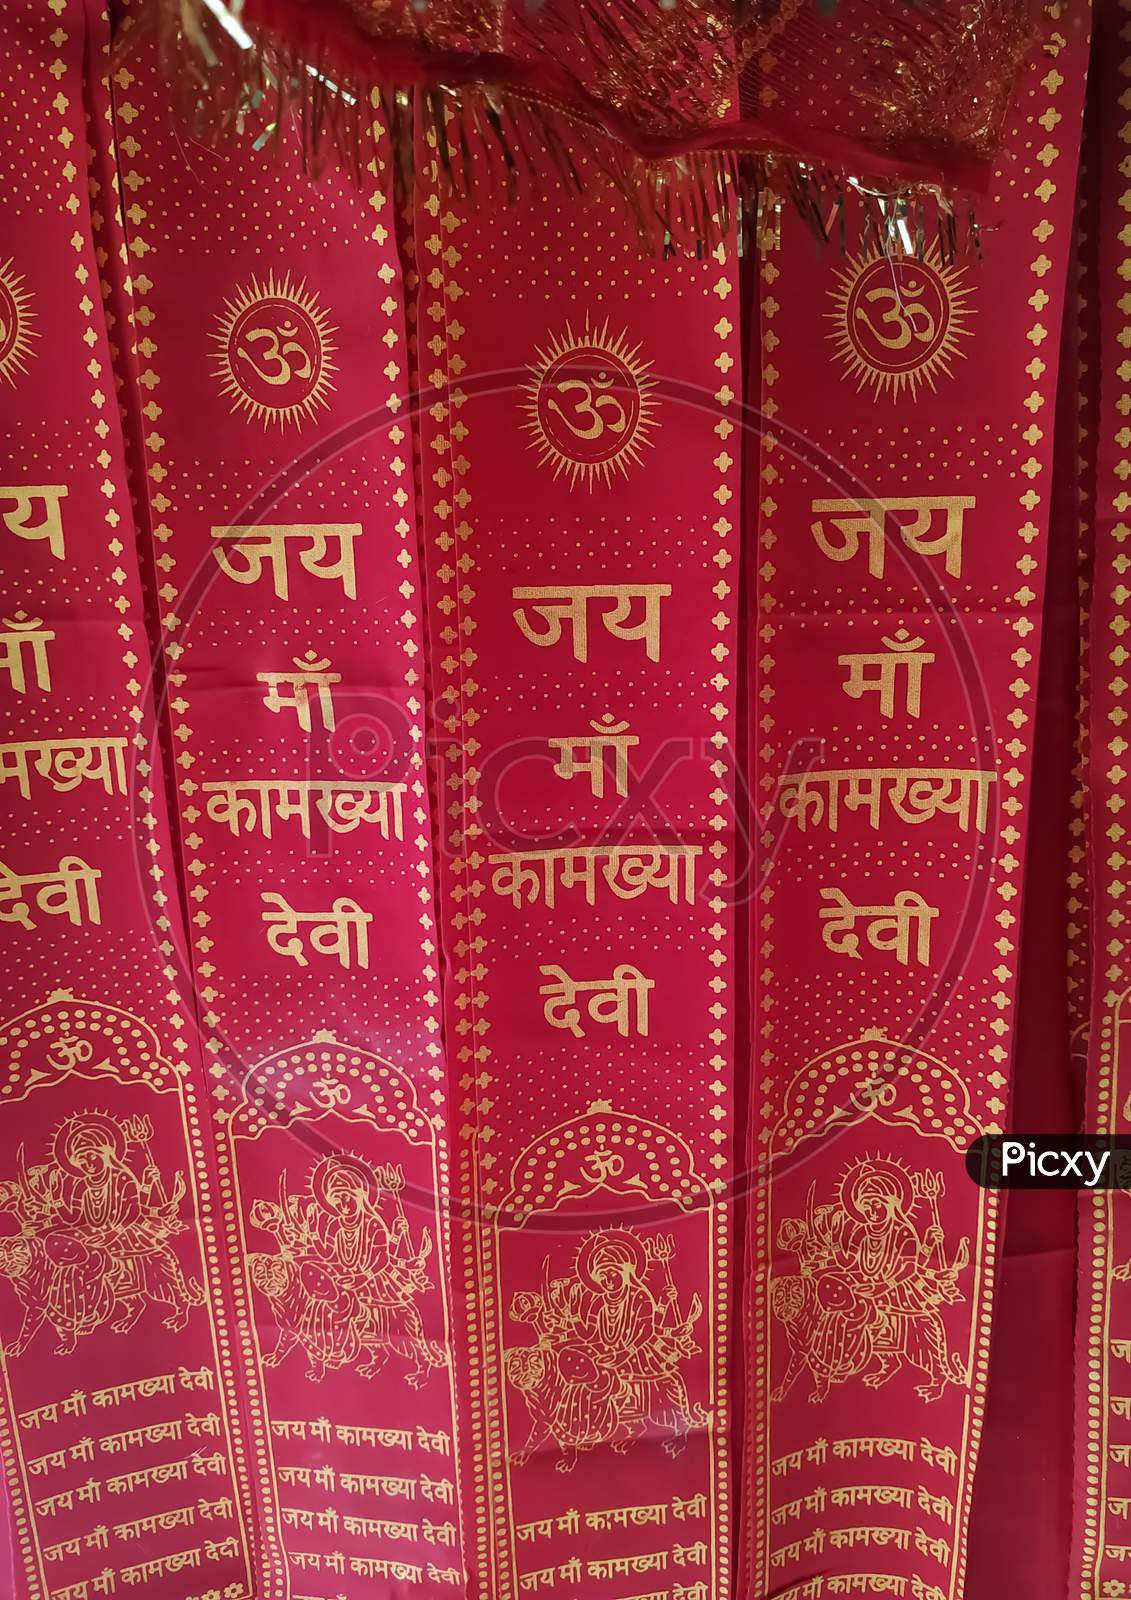 Image of Red fabric with Hindi words 